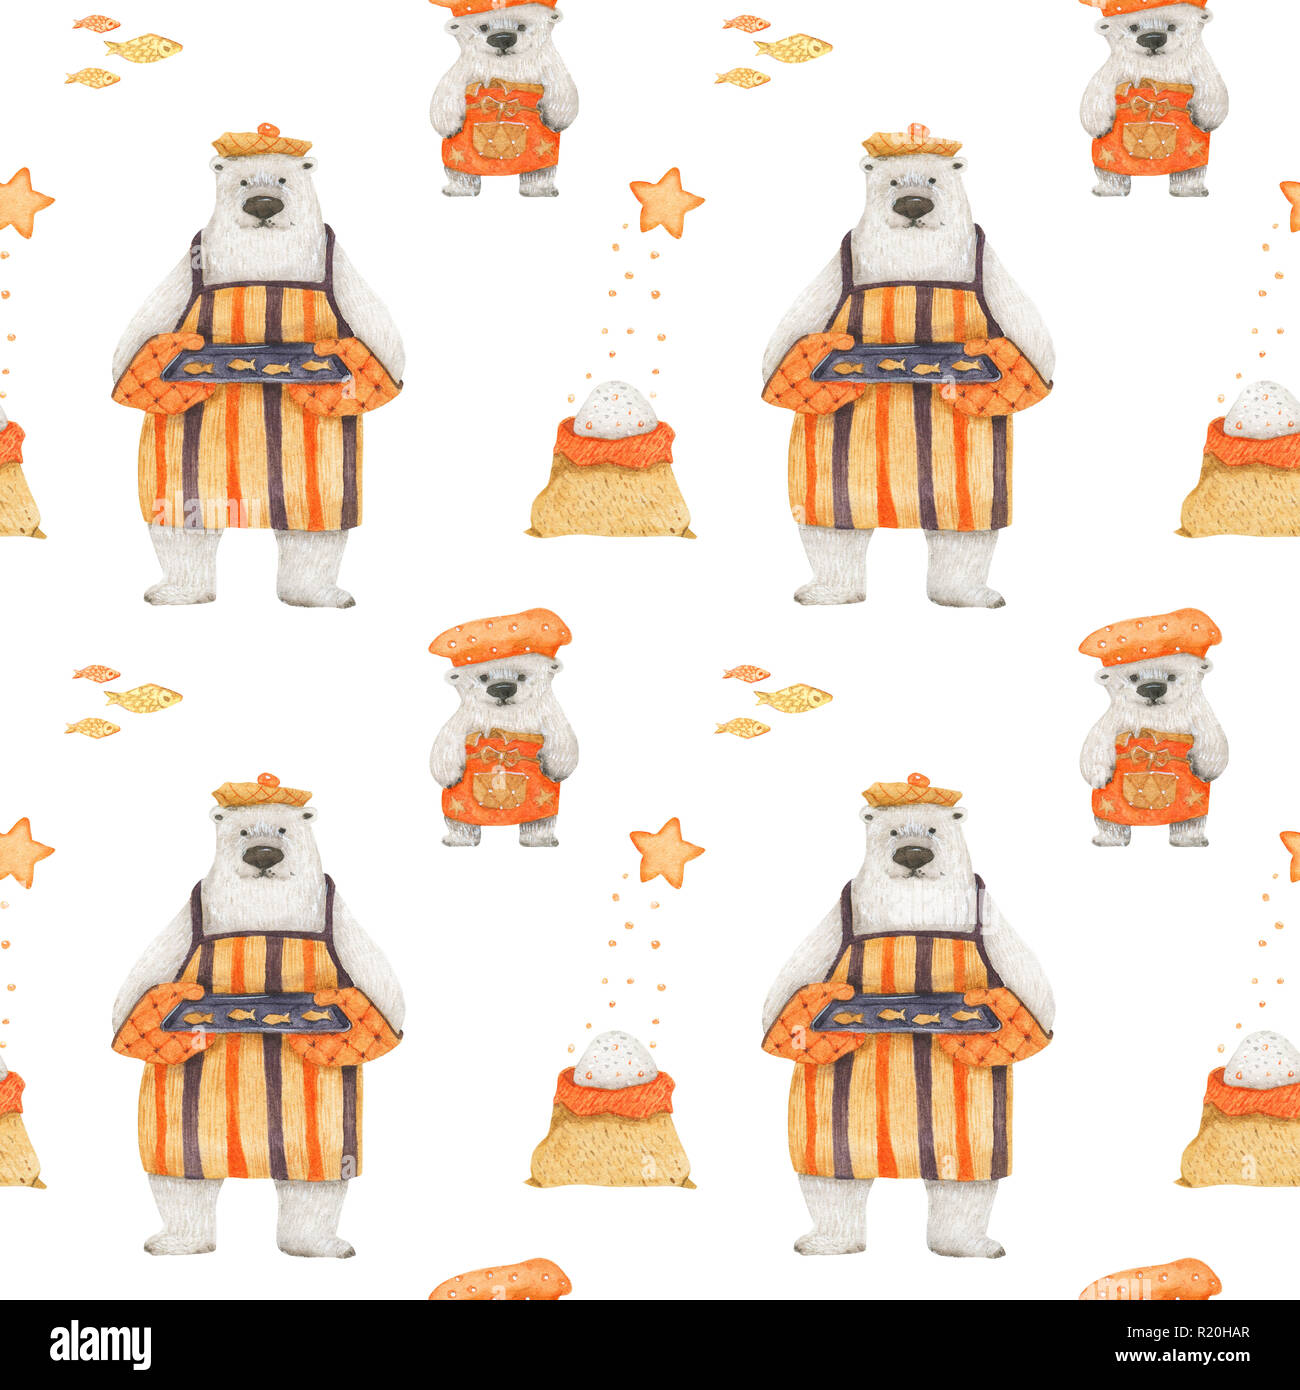 Polar bears baking cookies. Watercolor seamless patterns for textile, wrapping paper and any tiled design. White background, clipping path uncluded Stock Photo